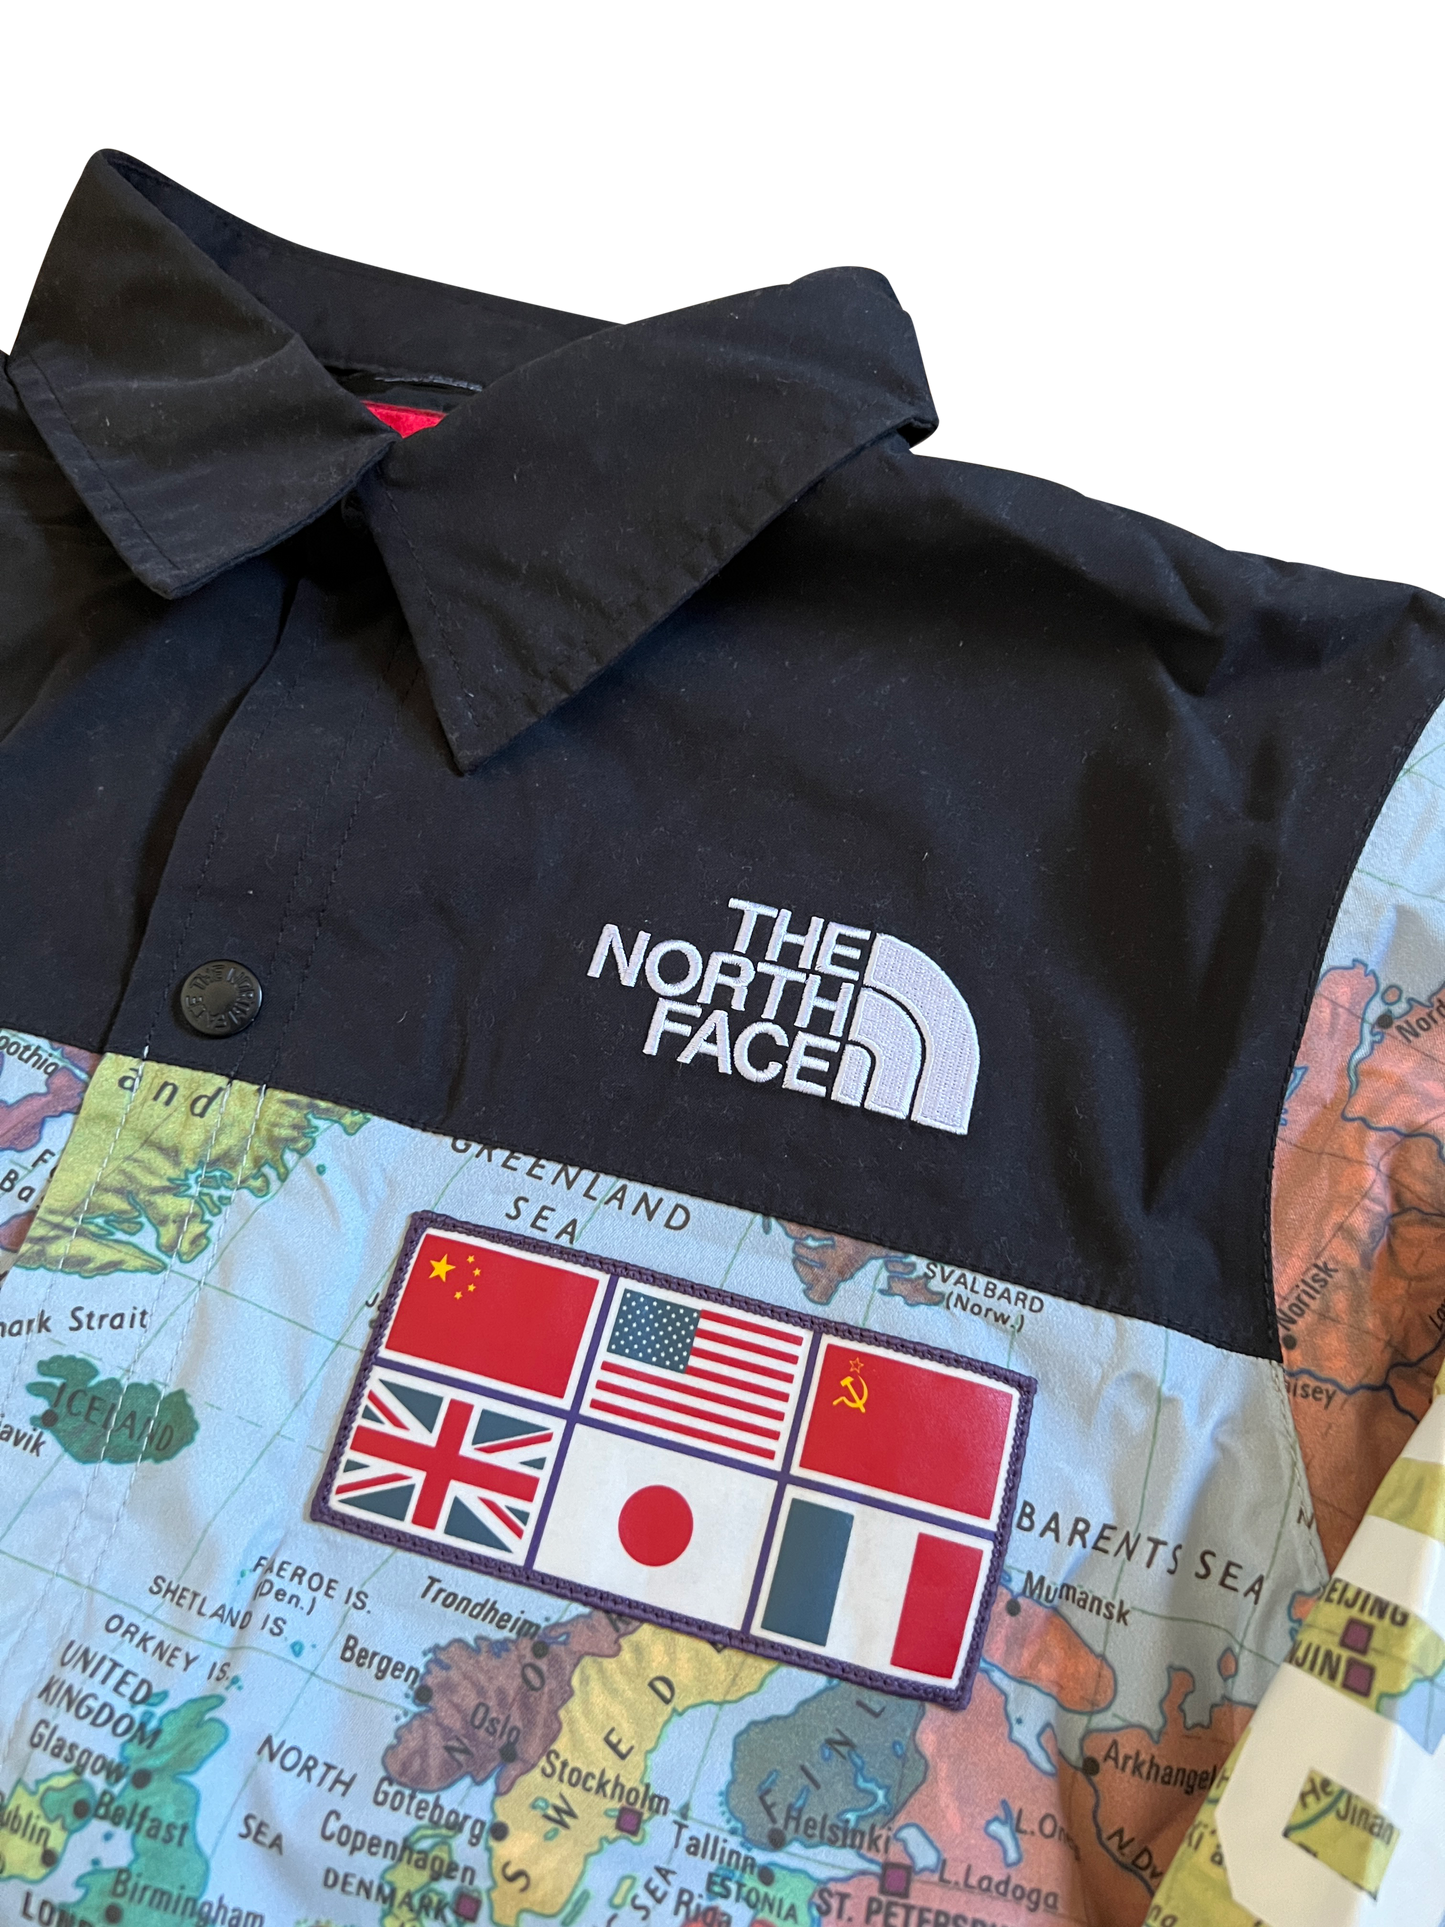 2014 Supreme X The North Face Maps Expedition Jacket